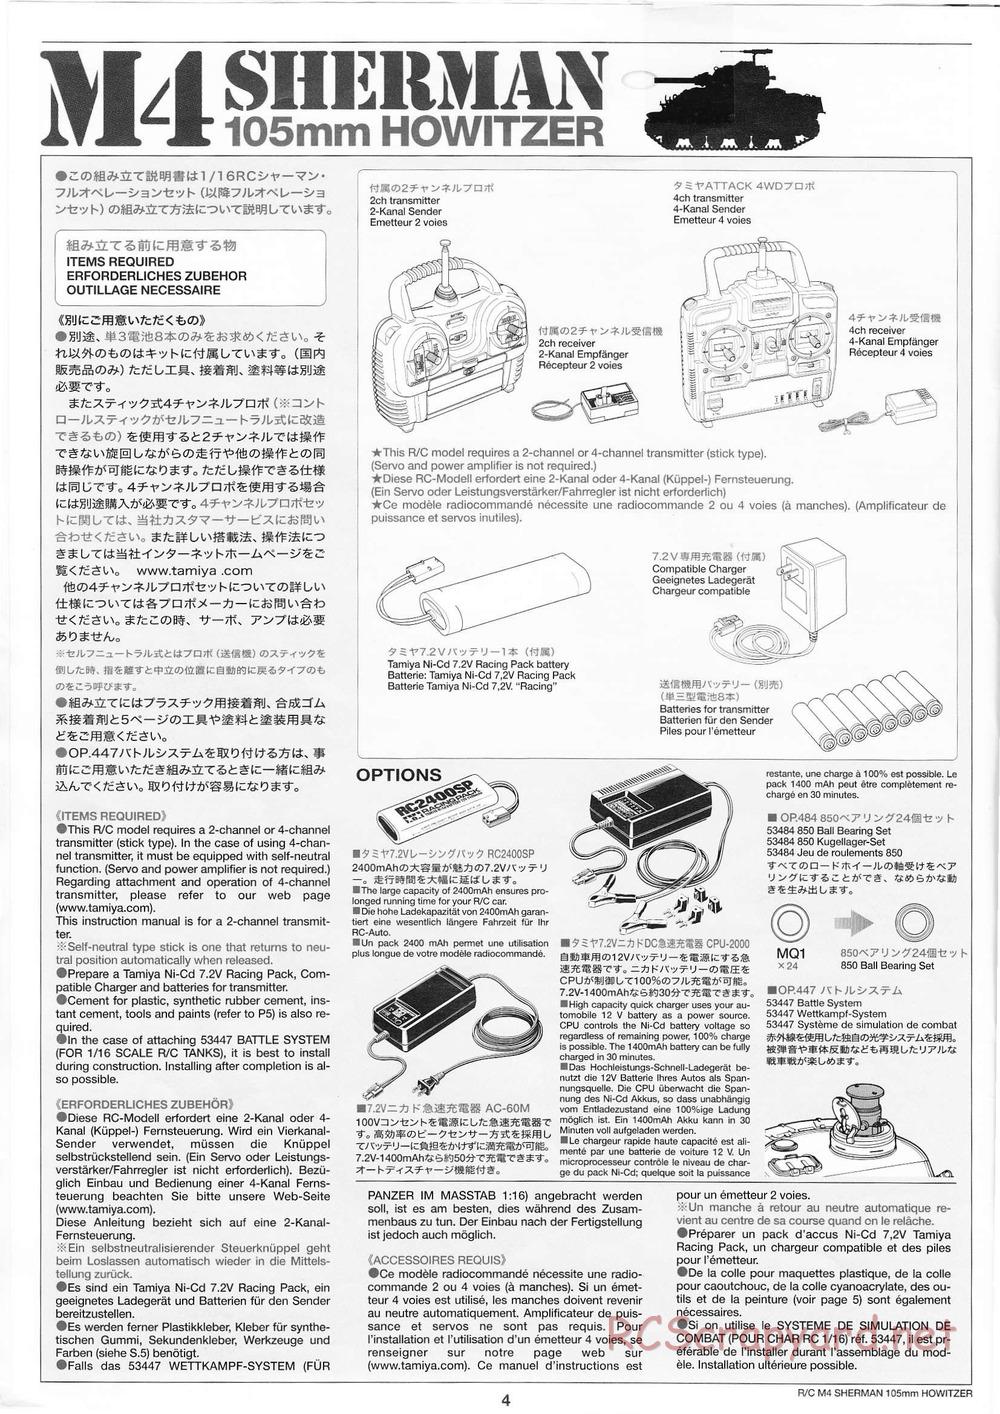 Tamiya - M4 Sherman 105mm Howitzer - 1/16 Scale Chassis - Manual - Page 4